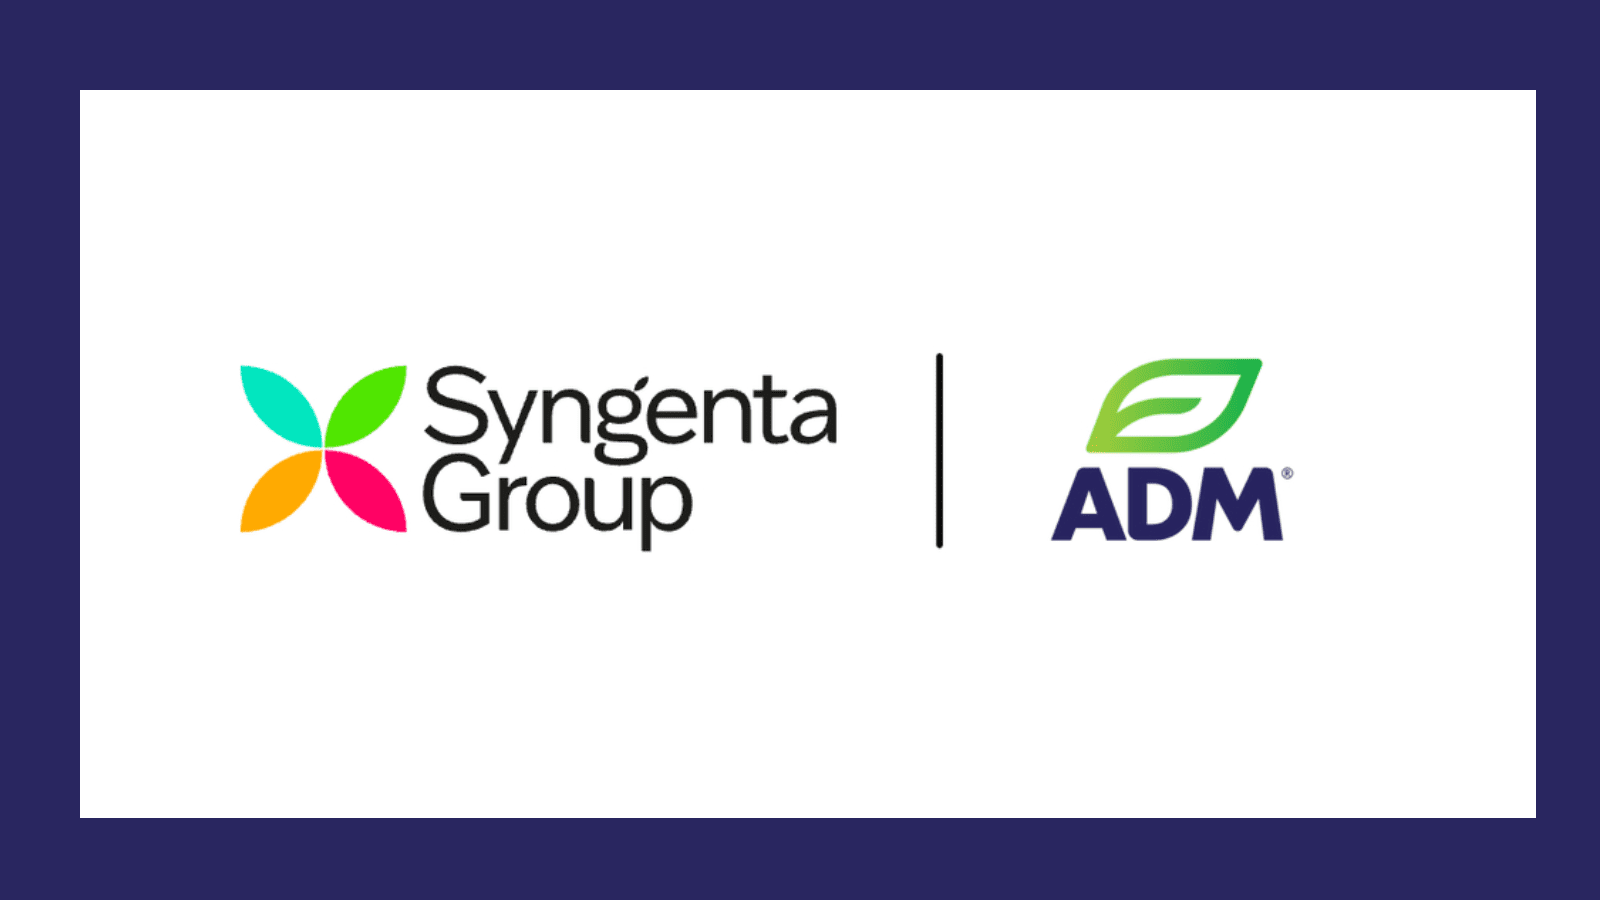 ADM partners Syngenta in pact to address biofuels rising demand 